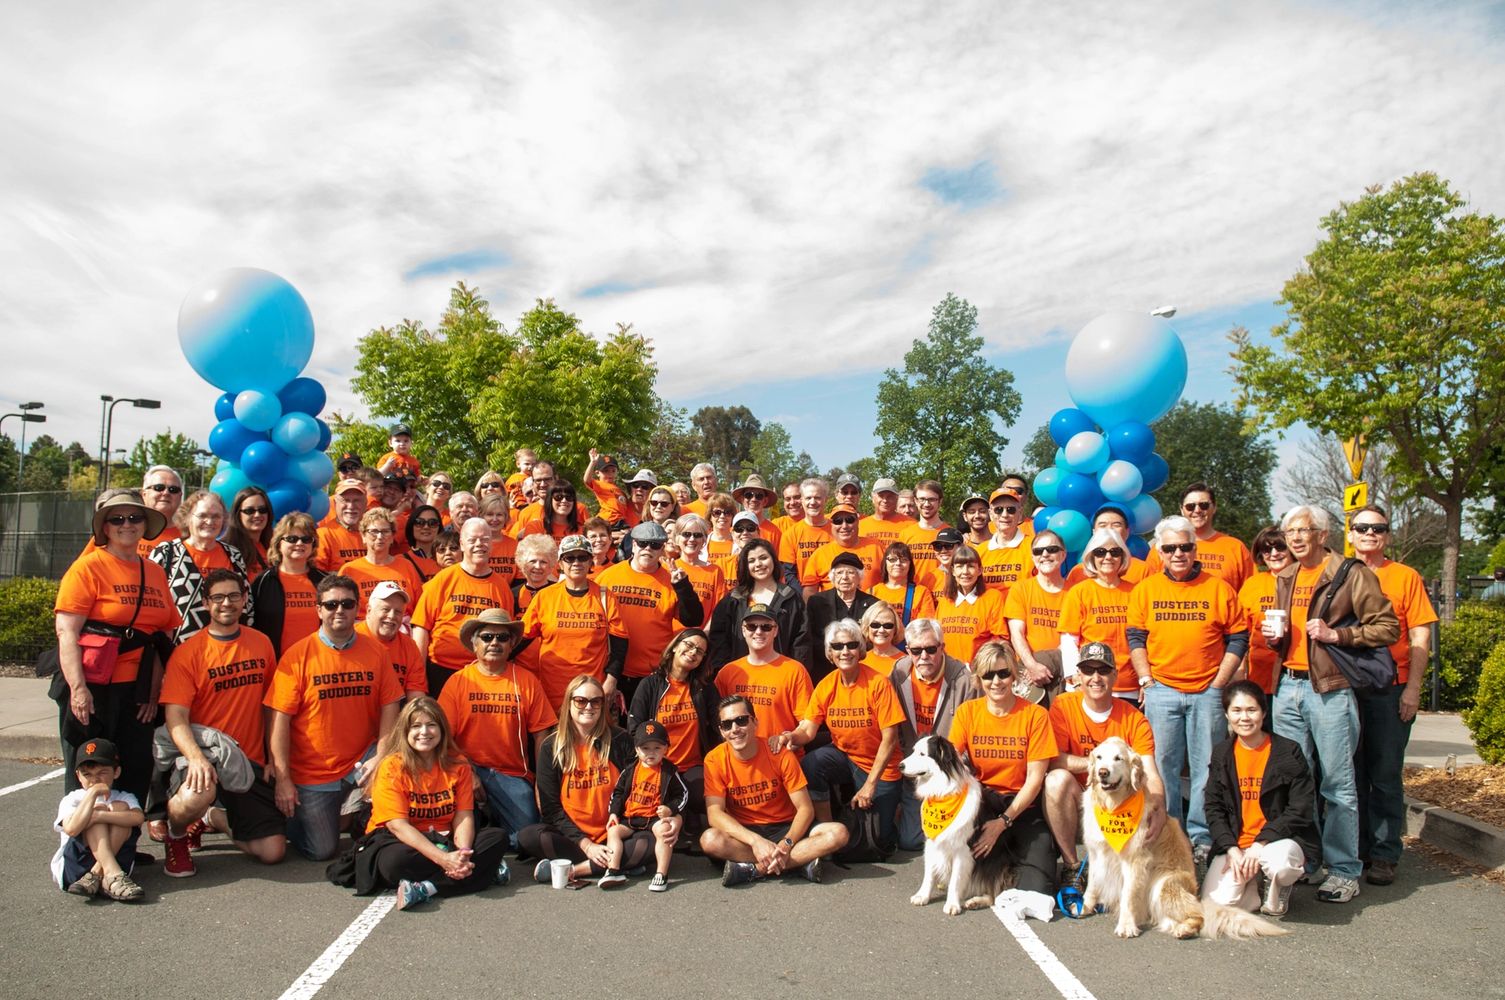 Buster's Buddies at the 2014 Cystic Fibrosis Foundation Great Strides Walk in Walnut Creek, Californ